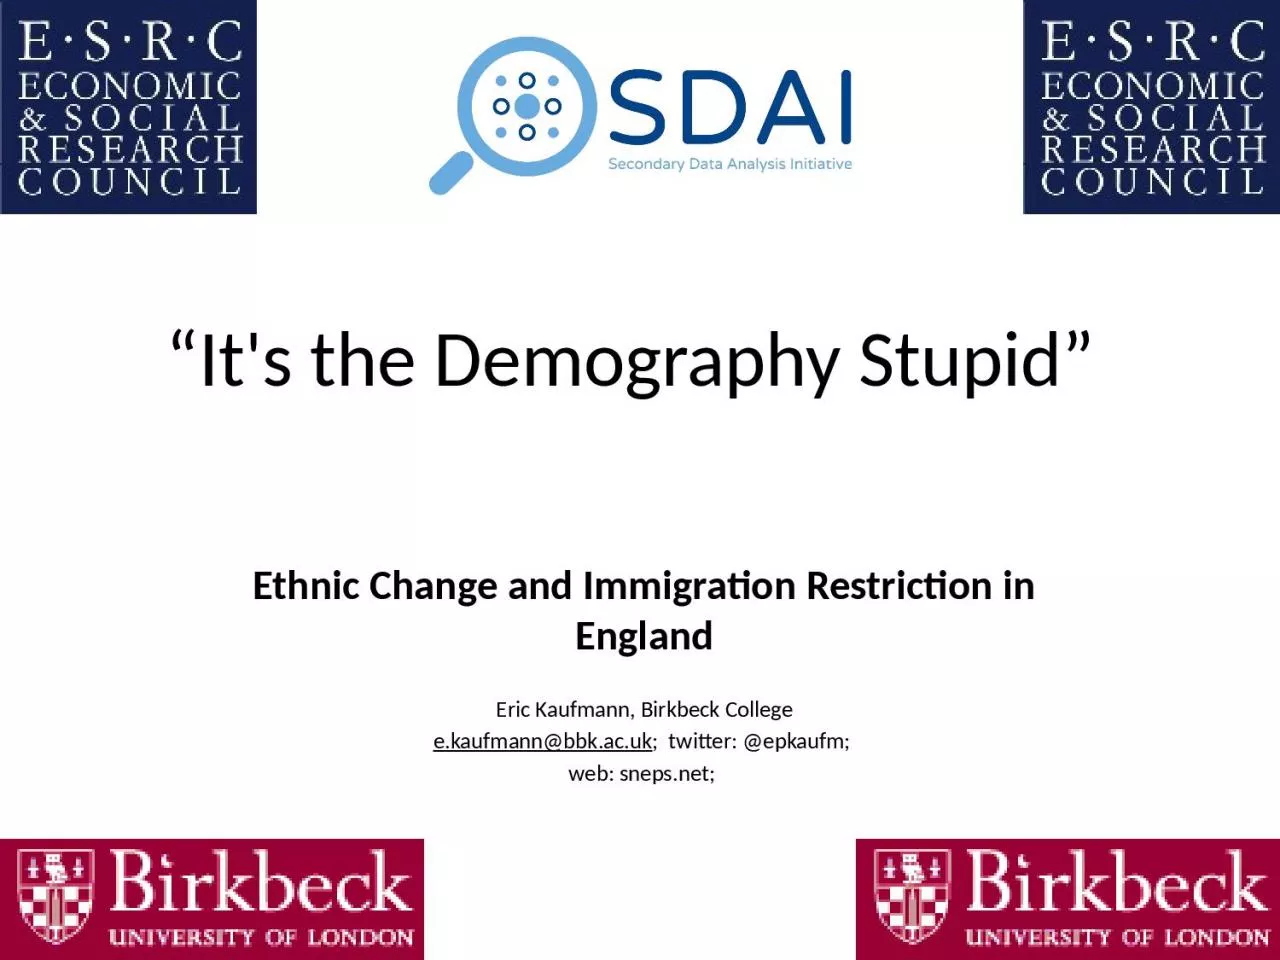 “It's the Demography Stupid”